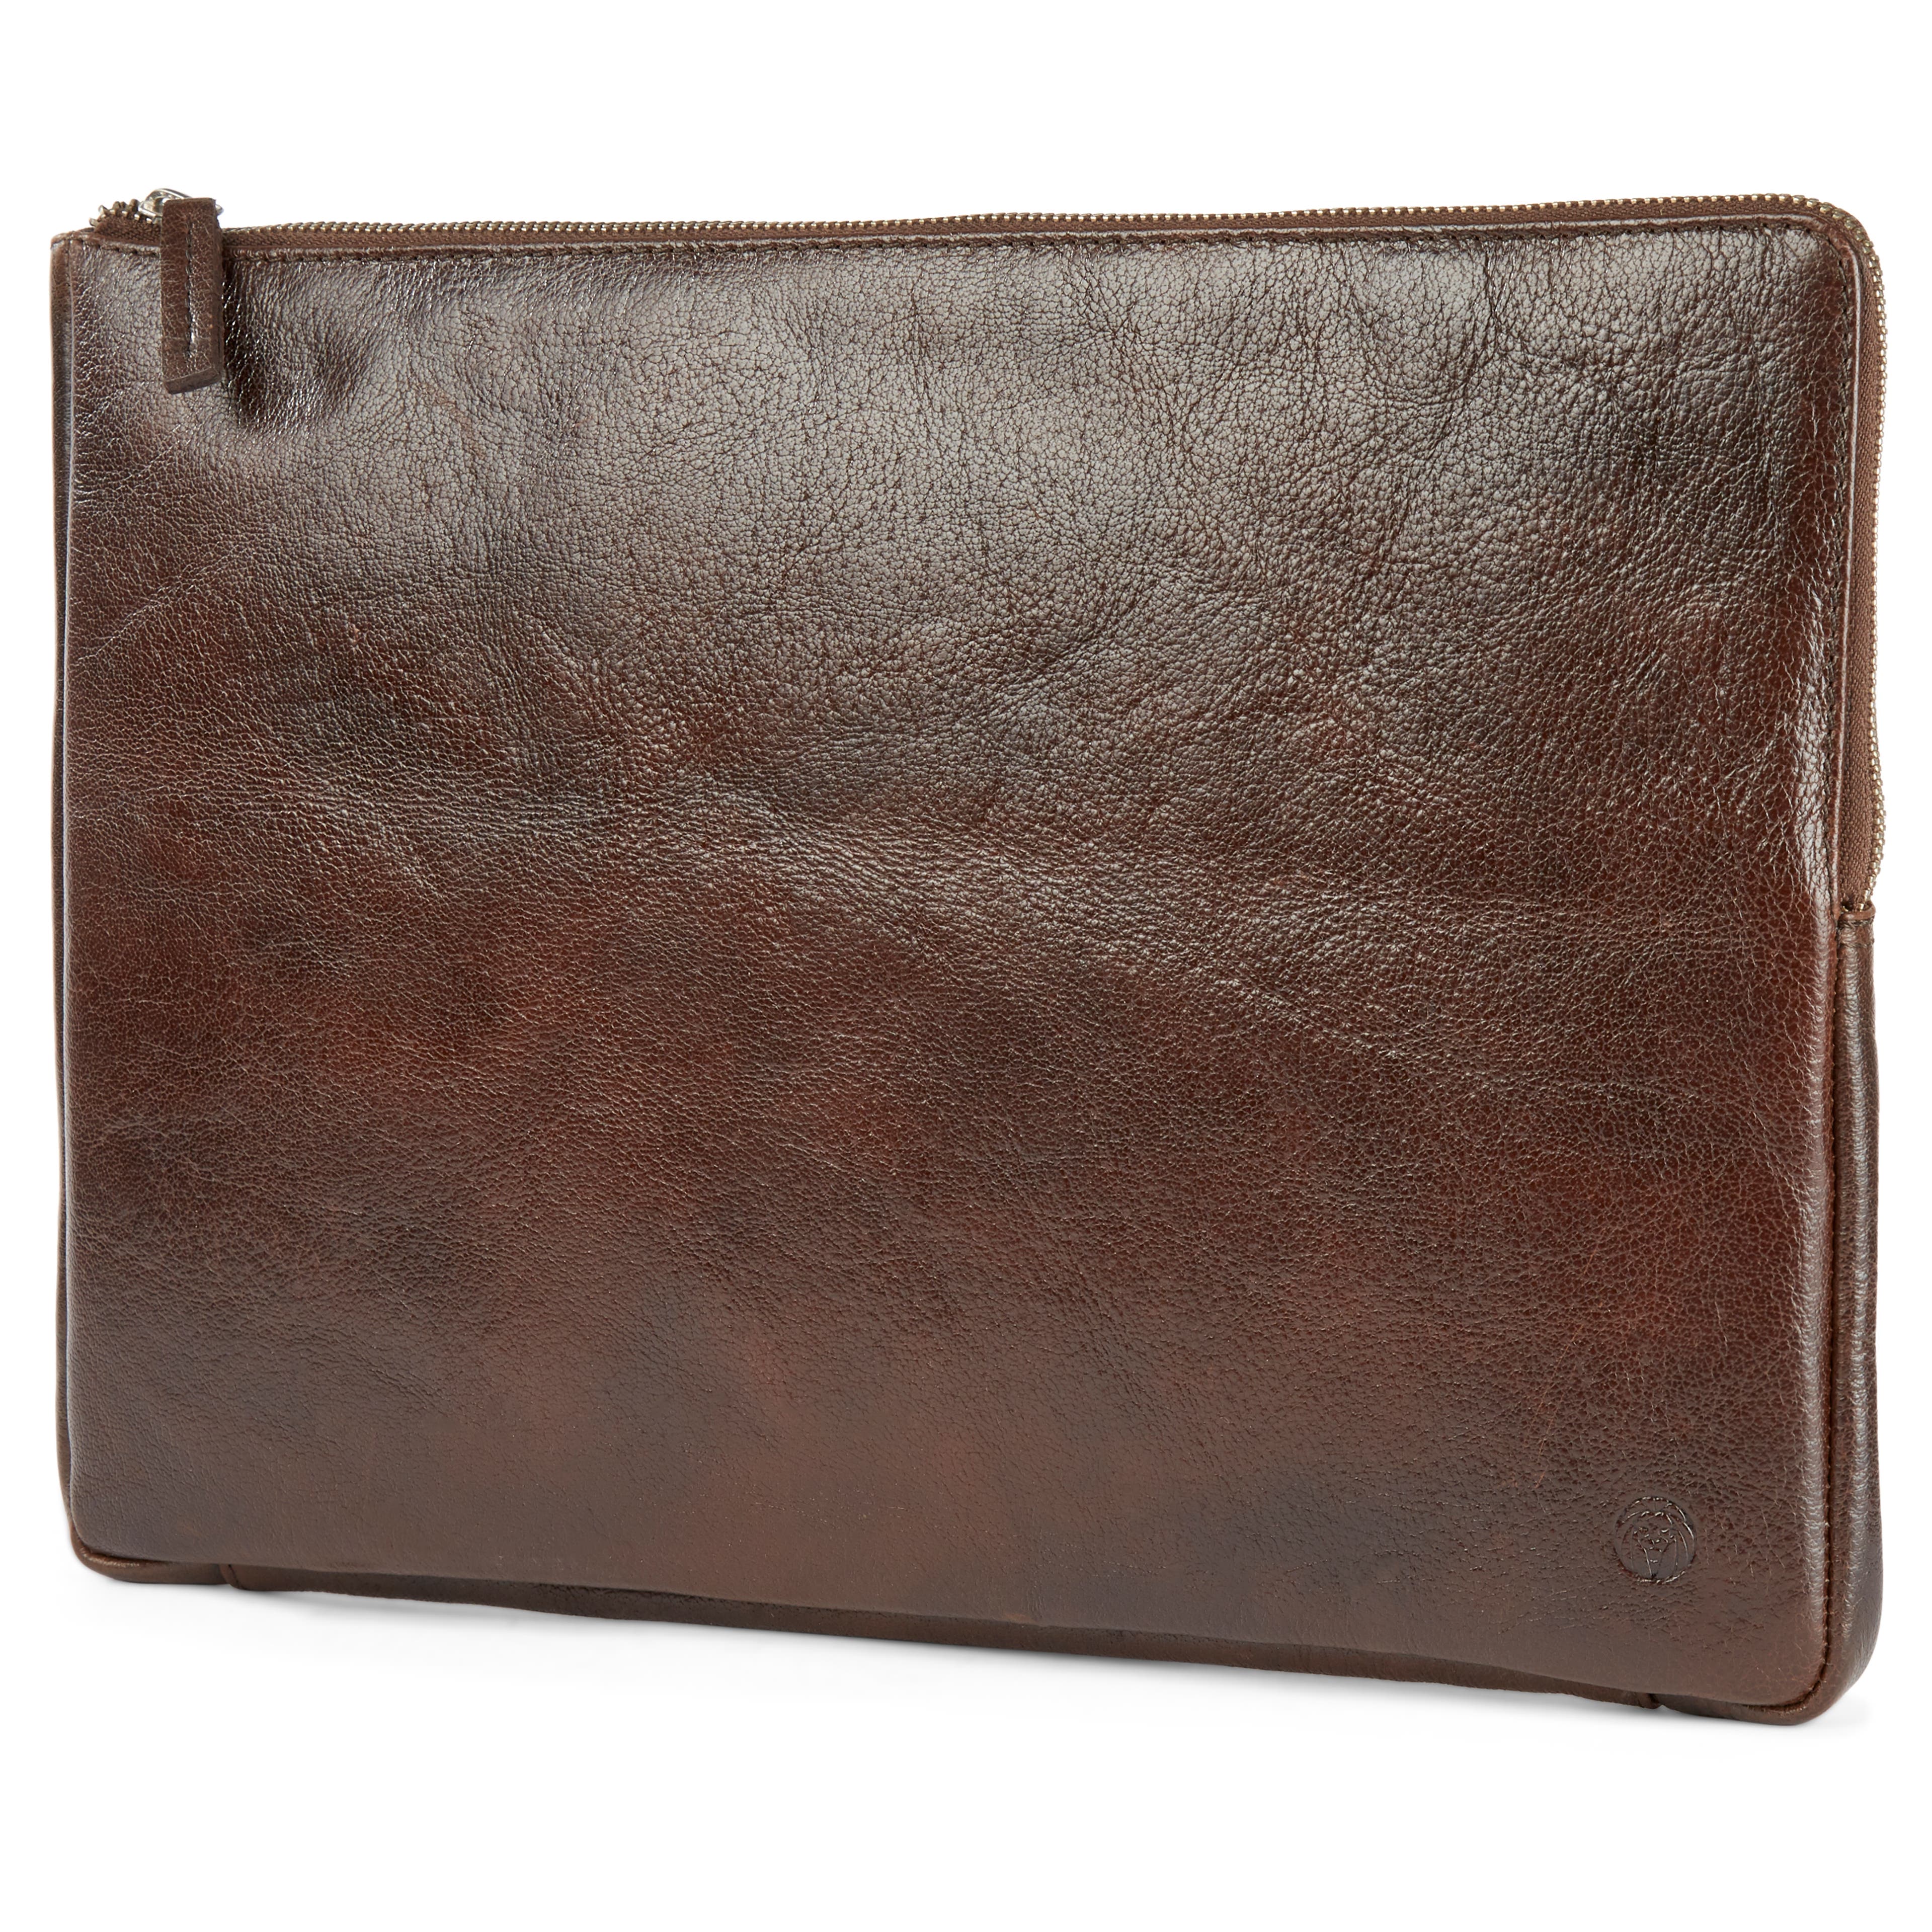 California Brown Small Leather Laptop Sleeve